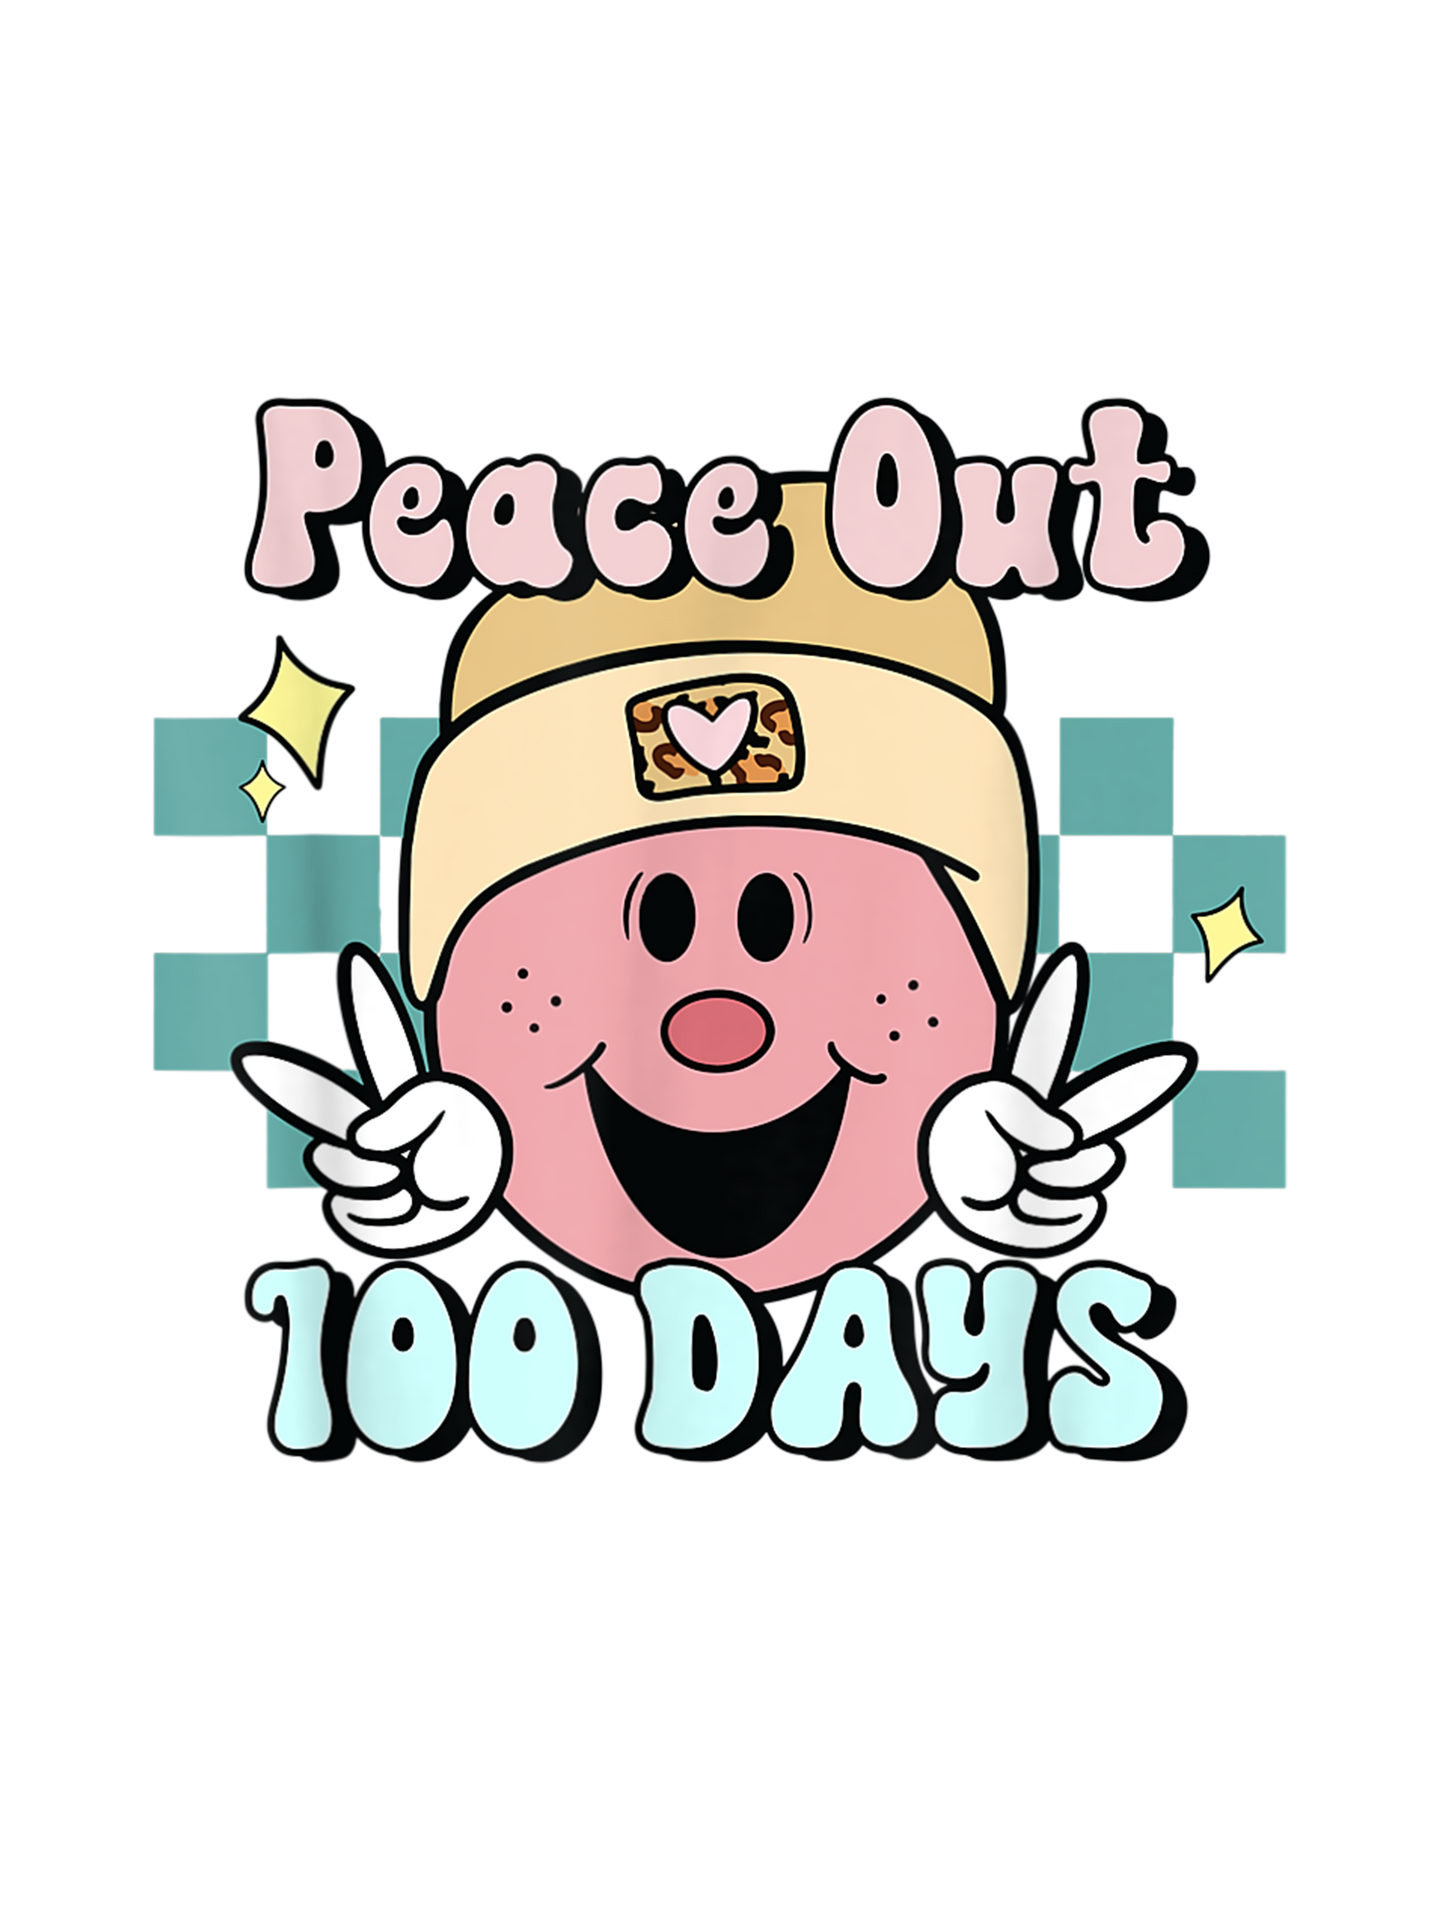 Peace Out 100 Days Peach Hat Smiley Camo Patch  Design Transfer